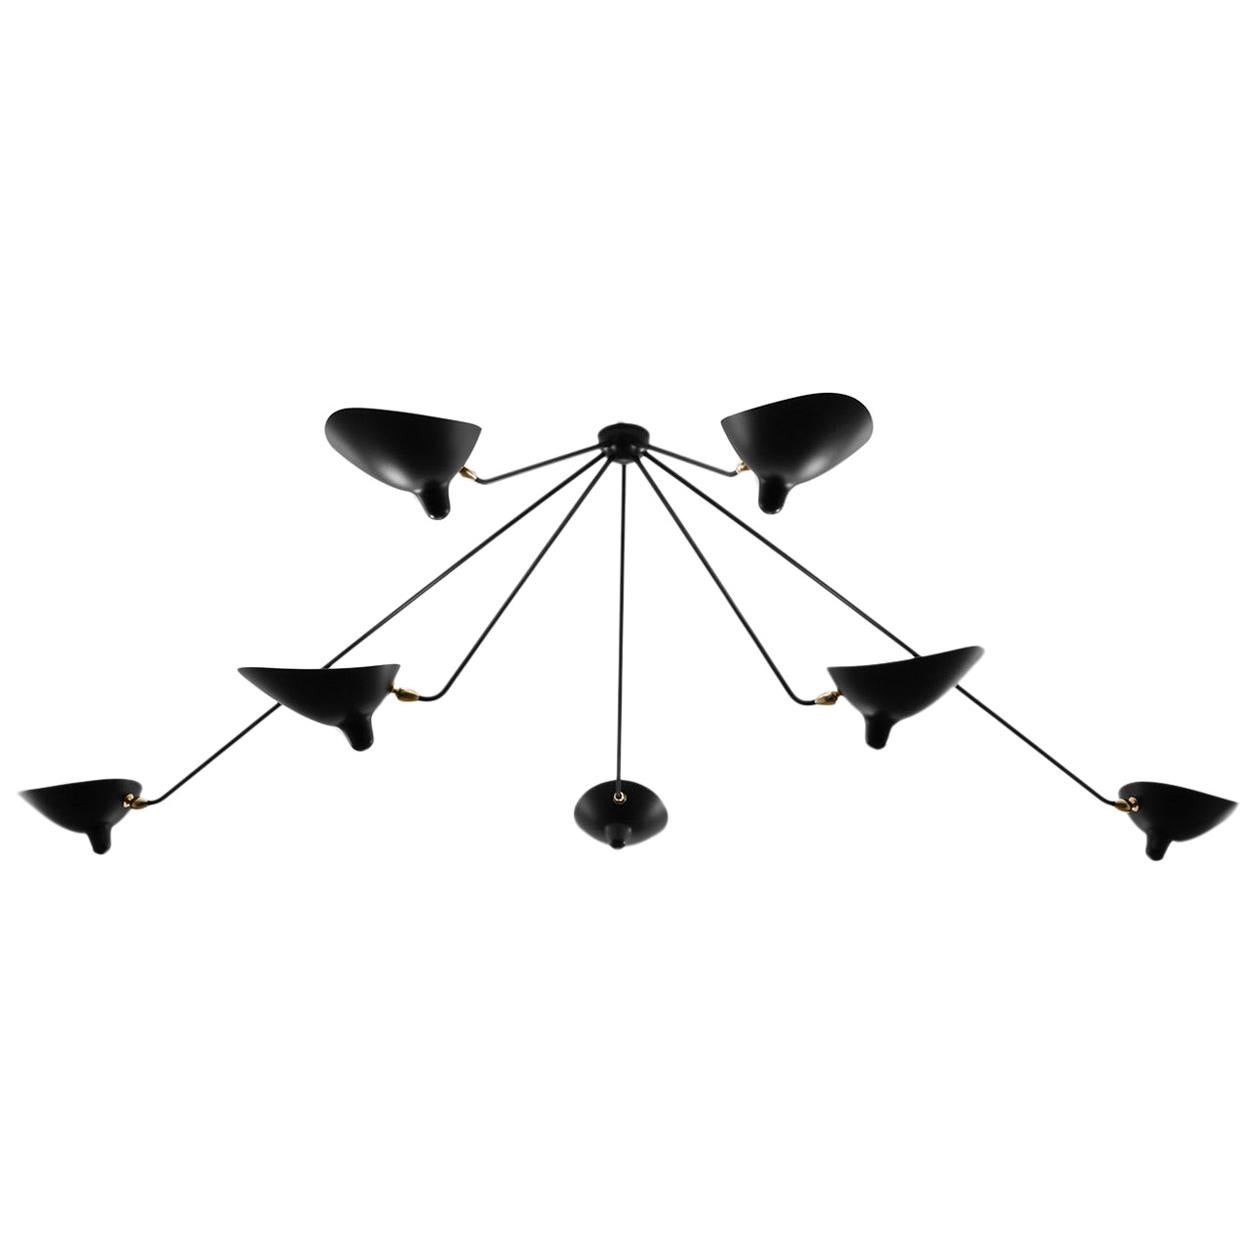 Serge Mouille Mid-Century Modern Black Seven Fixed Arms Spider Ceiling Lamp im Angebot